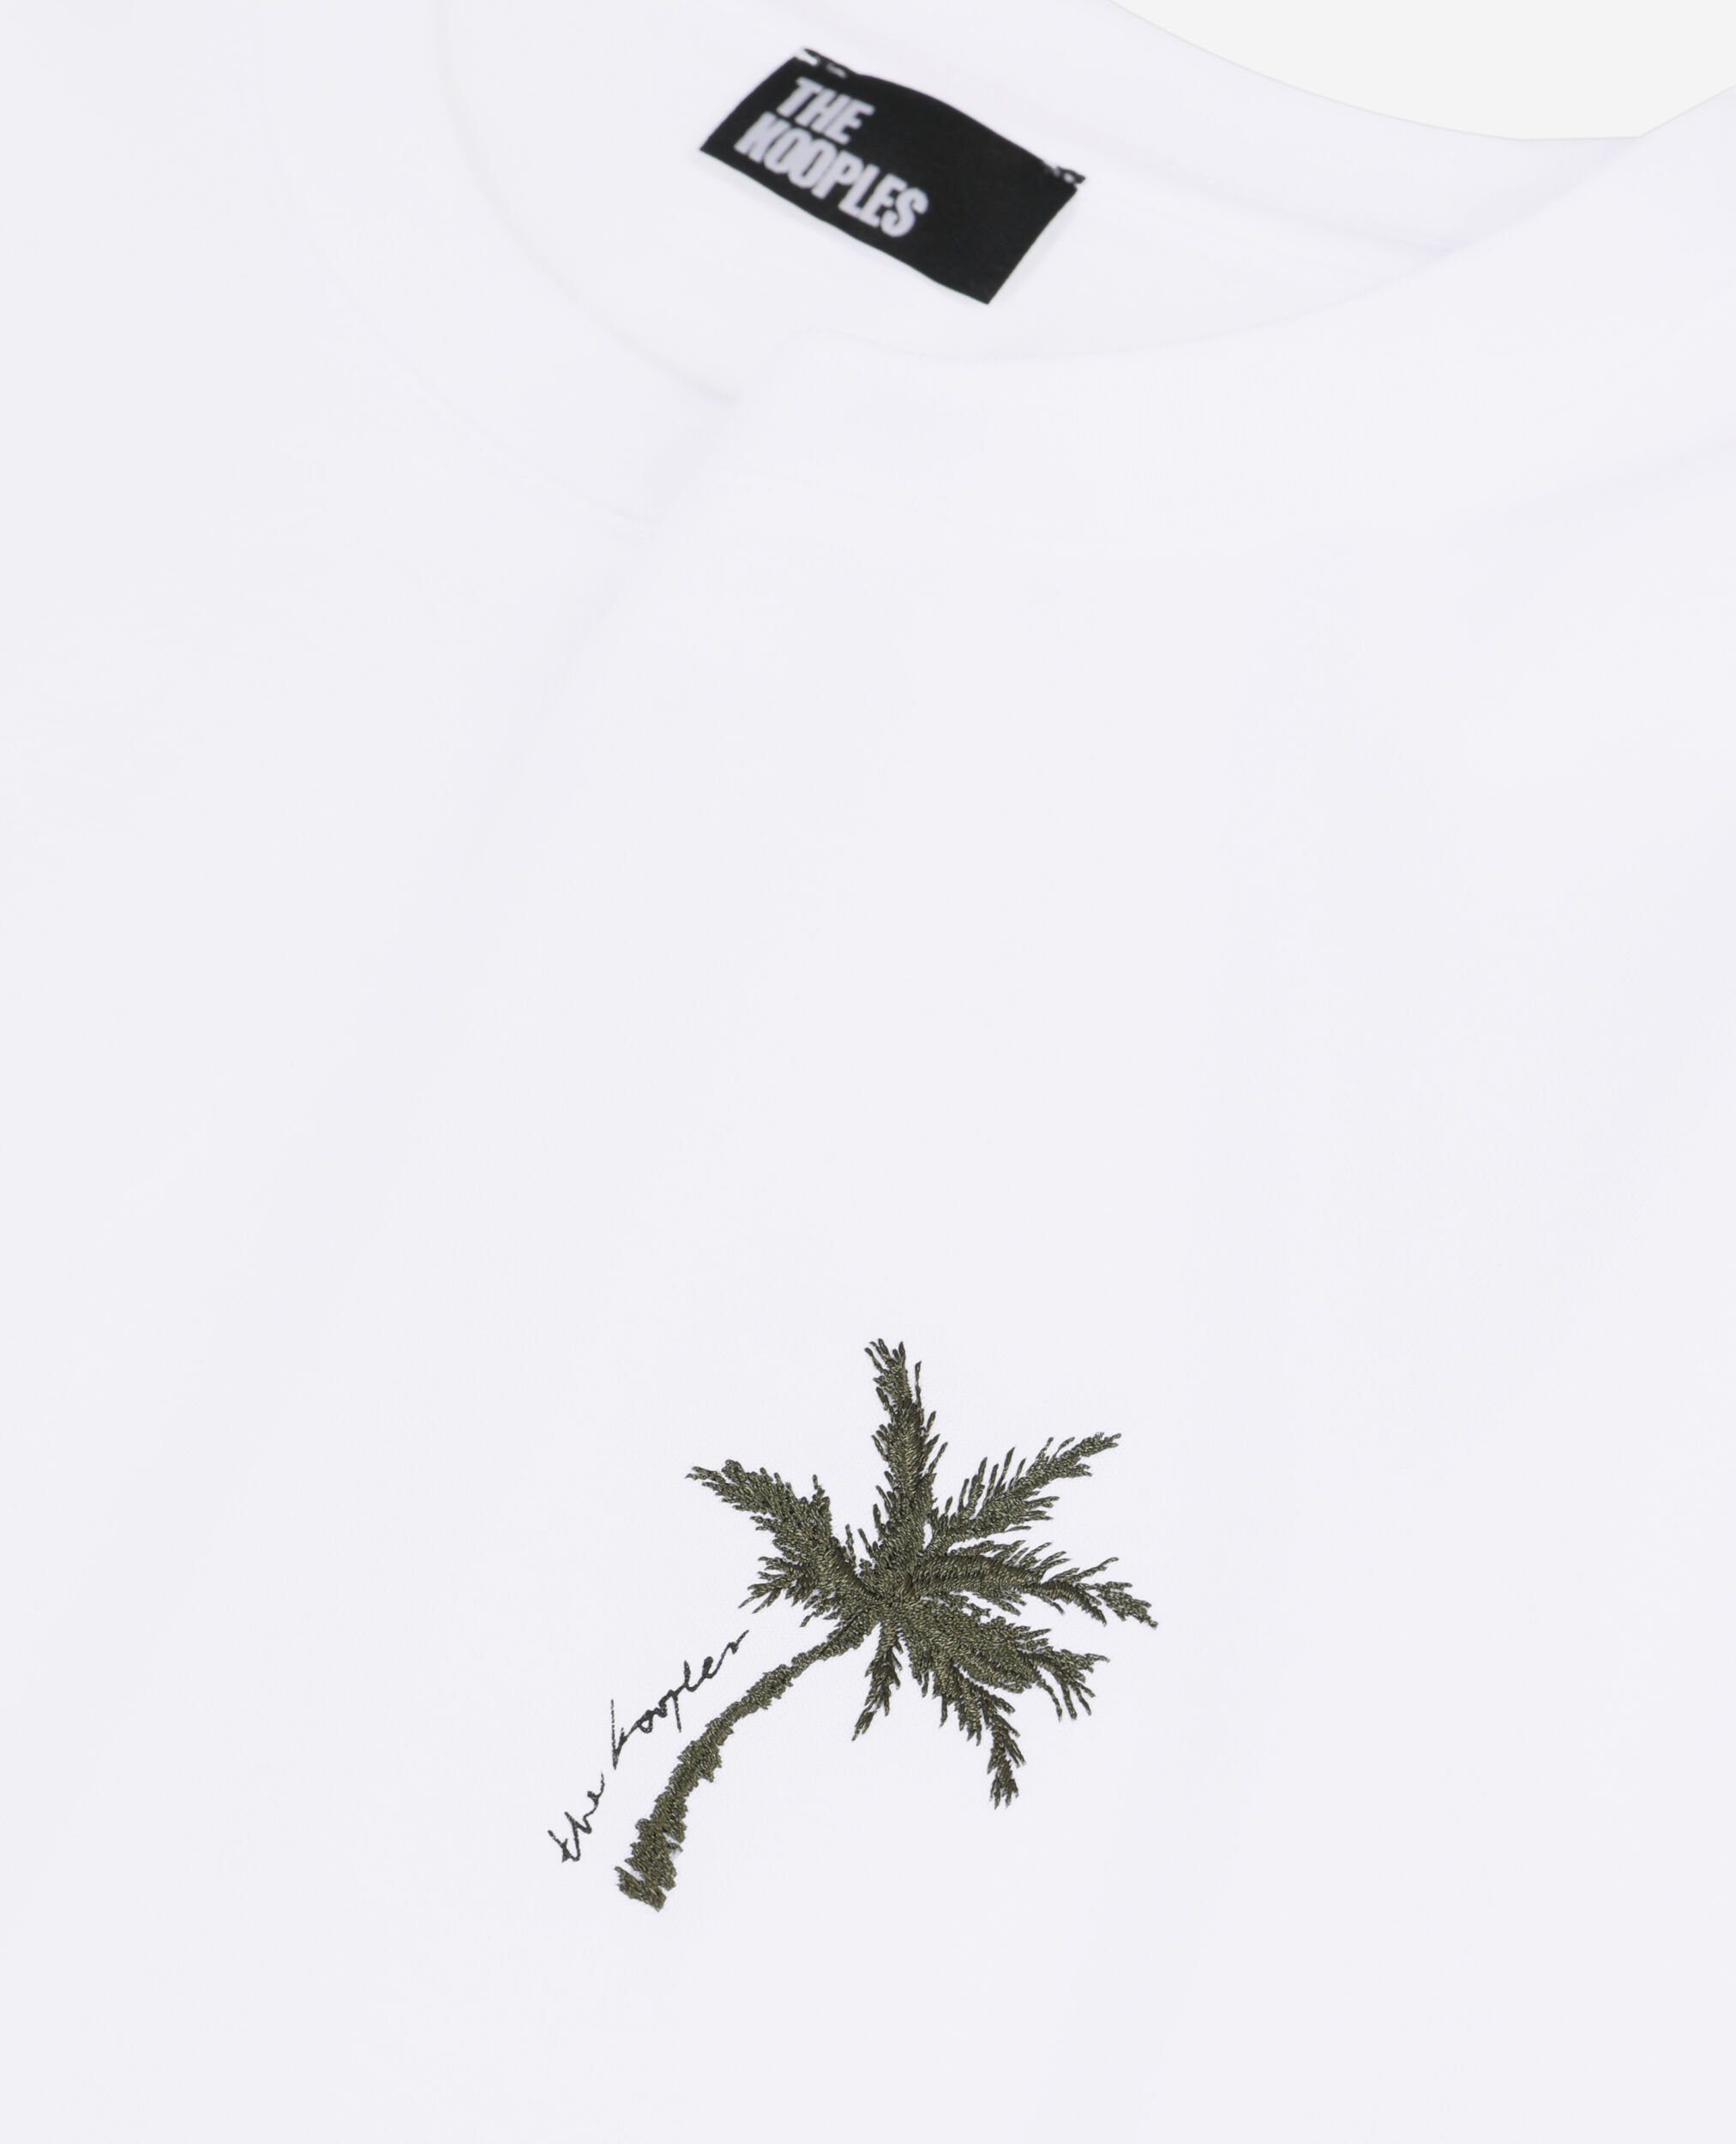 T-shirt blanc avec broderie Palm tree, WHITE, hi-res image number null